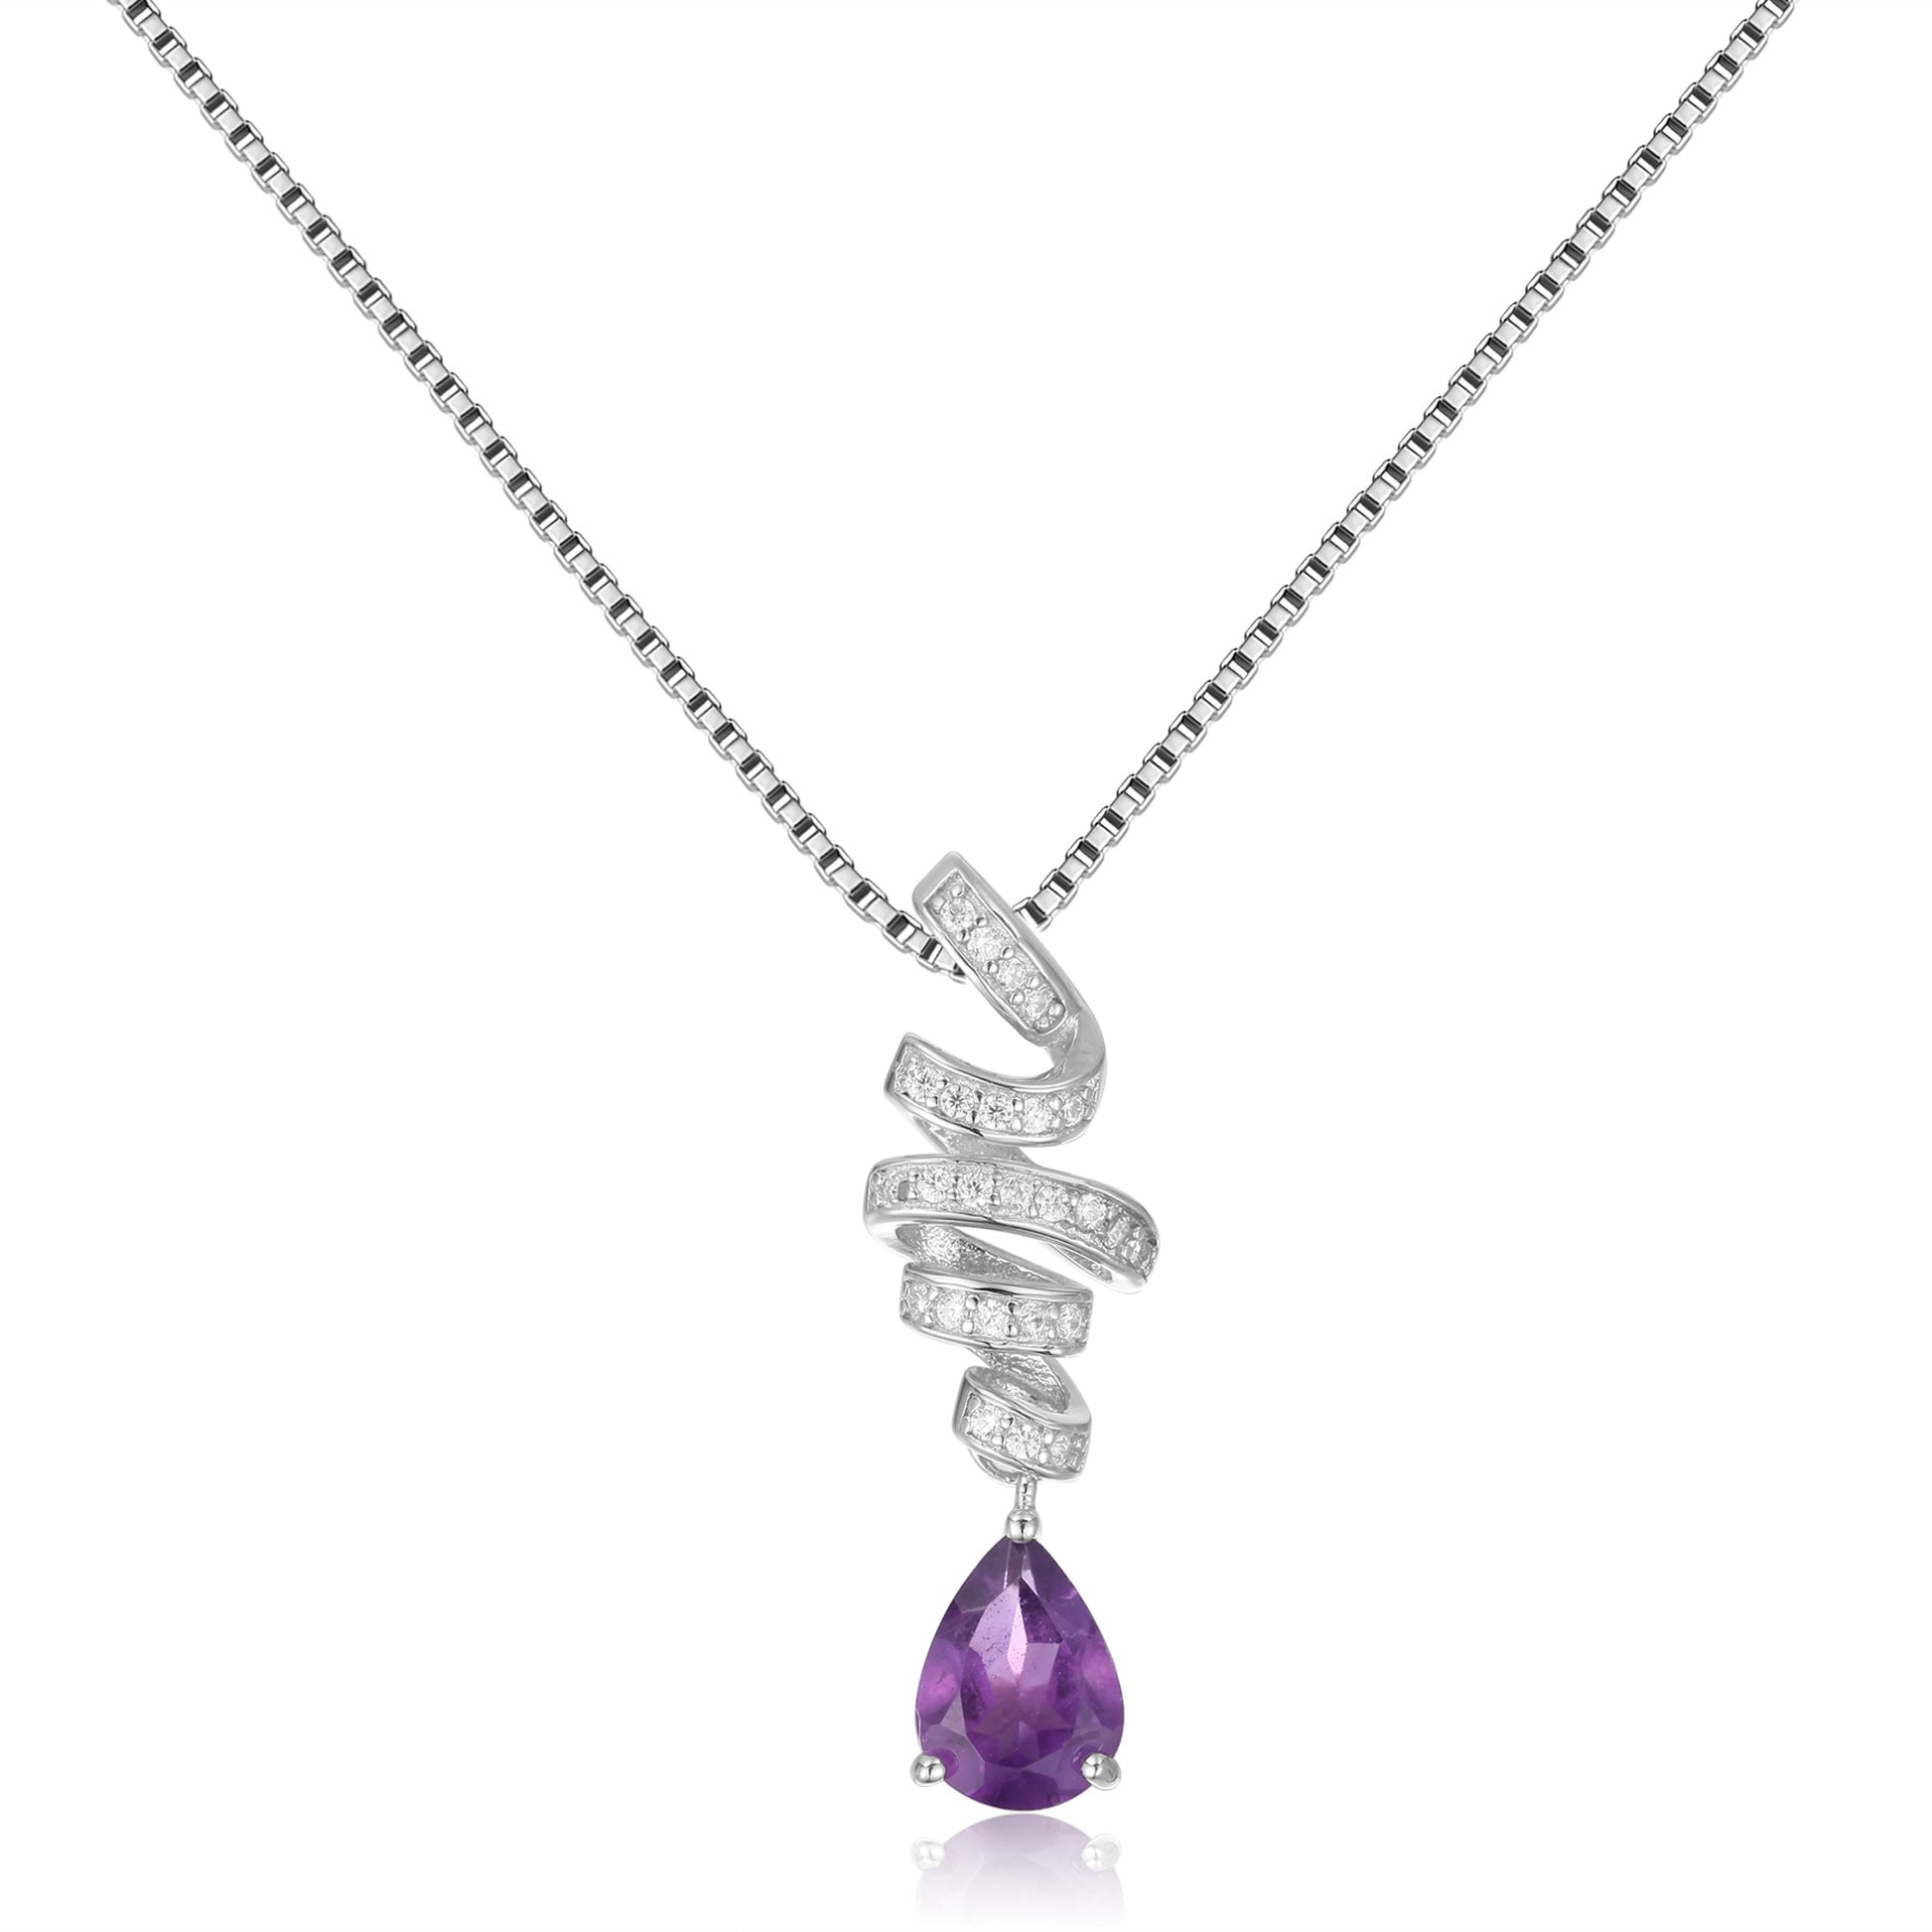 GEM&#39;S BALLET Ribbon Swirl Necklace 6x8mm Pear Shape Natural Amethyst Gemstone Necklace in 925 Stering SIlver Gift For Her Amethyst 45cm|925 Sterling Silver